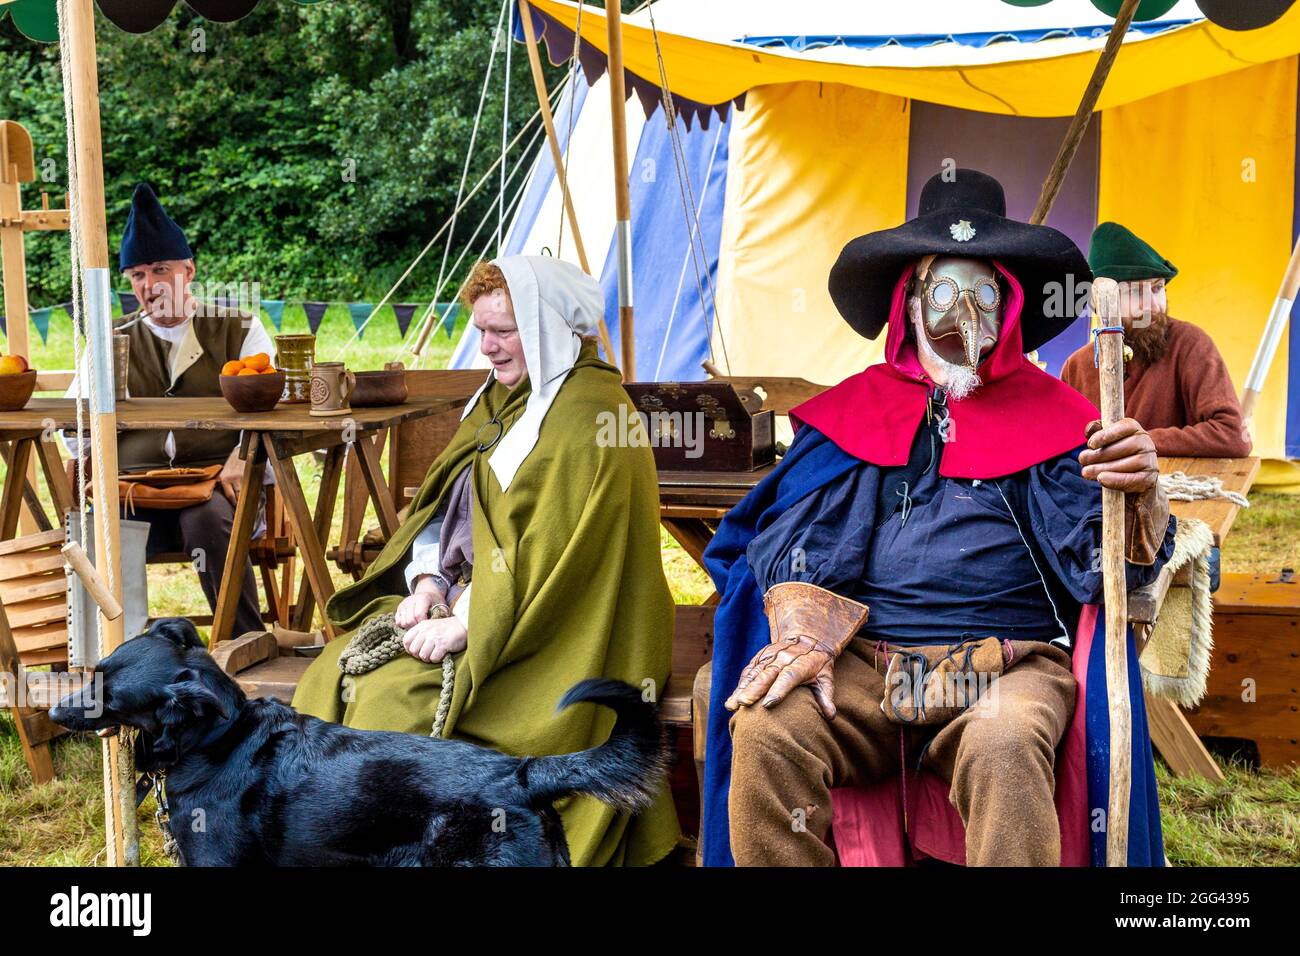 8th August 2021 - Man dressed up as plague doctor, wearing beaked mask at Mediaval festival Loxwood Joust, West Sussex, England, UK Stock Photo